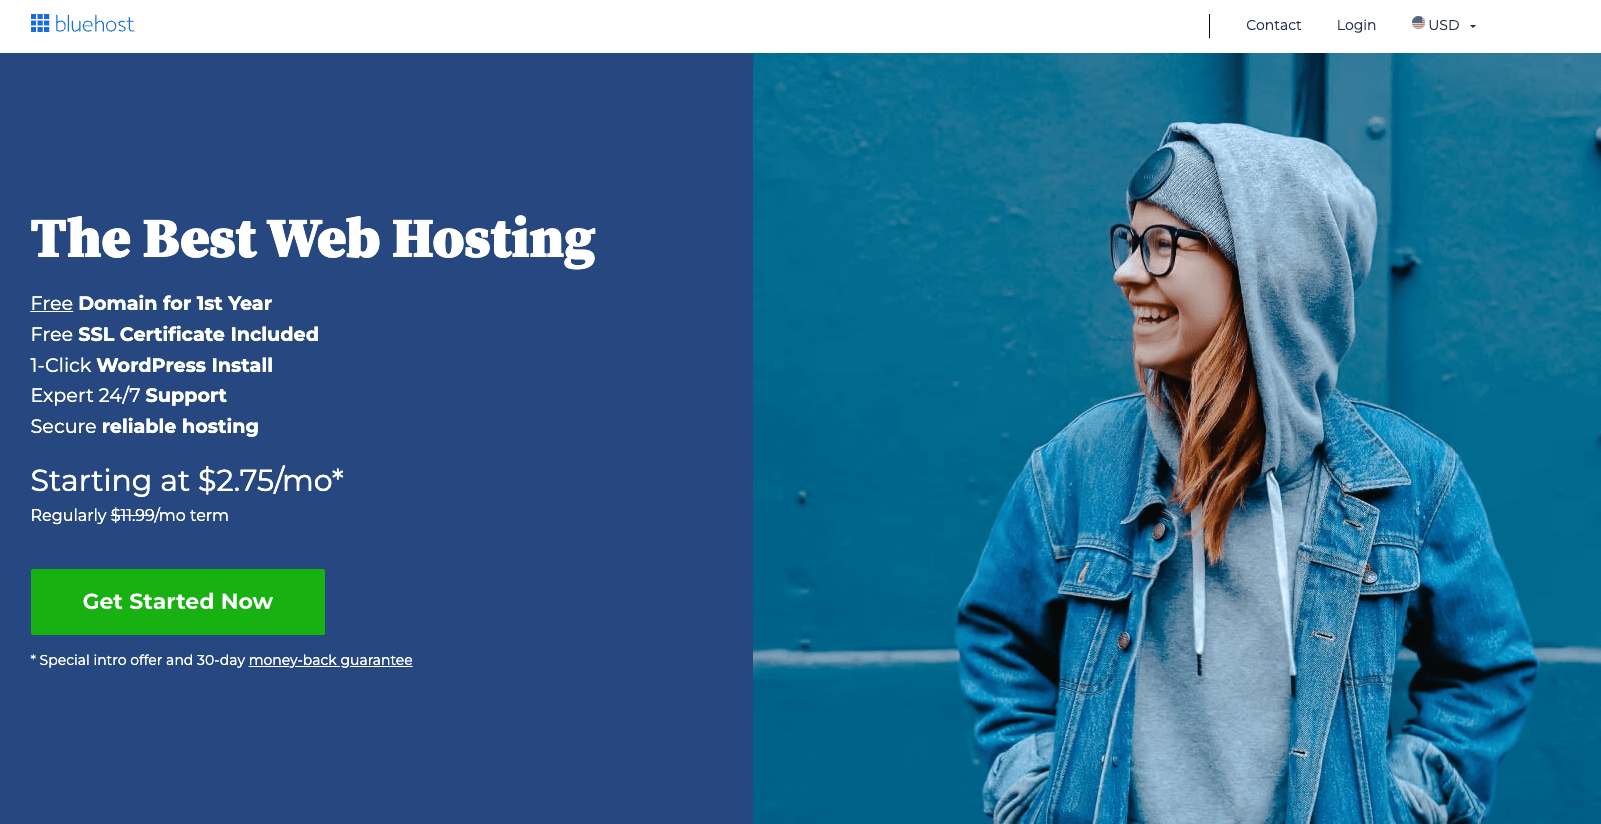 Buy hosting and a domain name with Bluehost